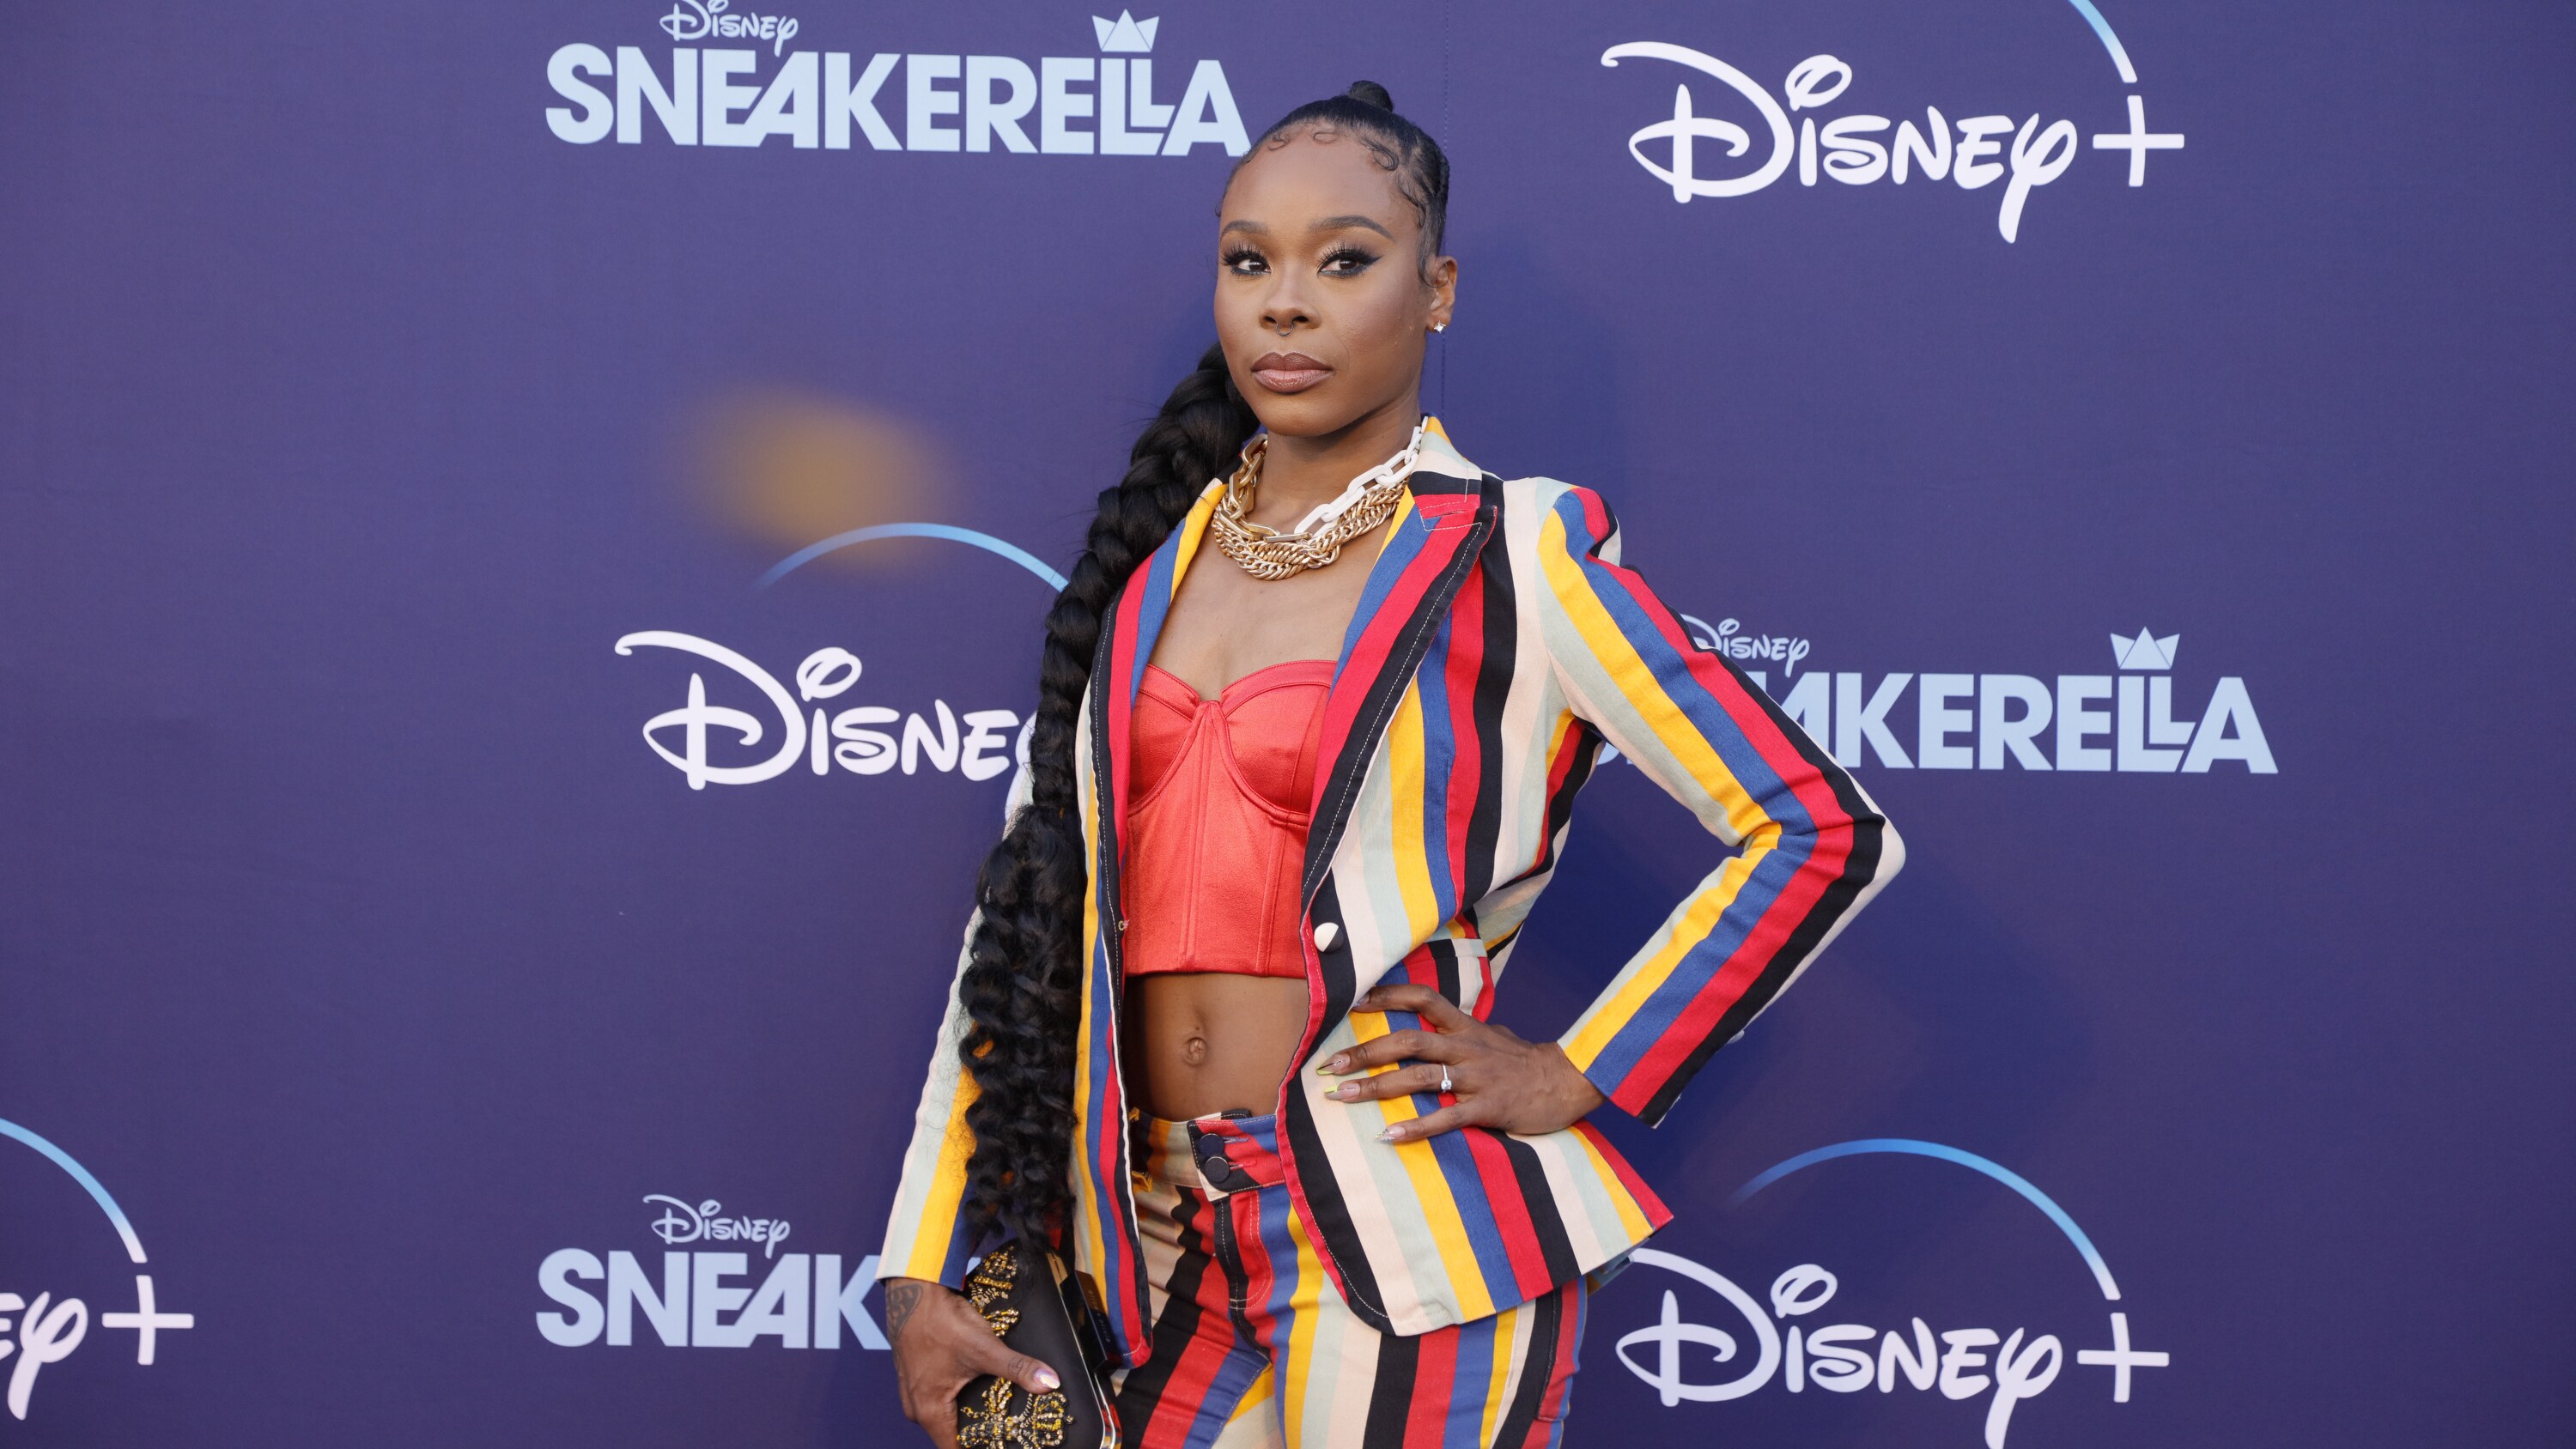 “SNEAKERELLA” RED CARPET PREMIERE EVENT - Stars attend the red carpet premiere of the upcoming music-driven Disney+ Original Movie “Sneakerella” at Pier 17 in New York City on Wednesday, Mary 11. The film begins streaming Friday, May 13, exclusively on Disney+. (Disney/John Manno) EBONY WILLIAMS (CHOREOGRAPHER)